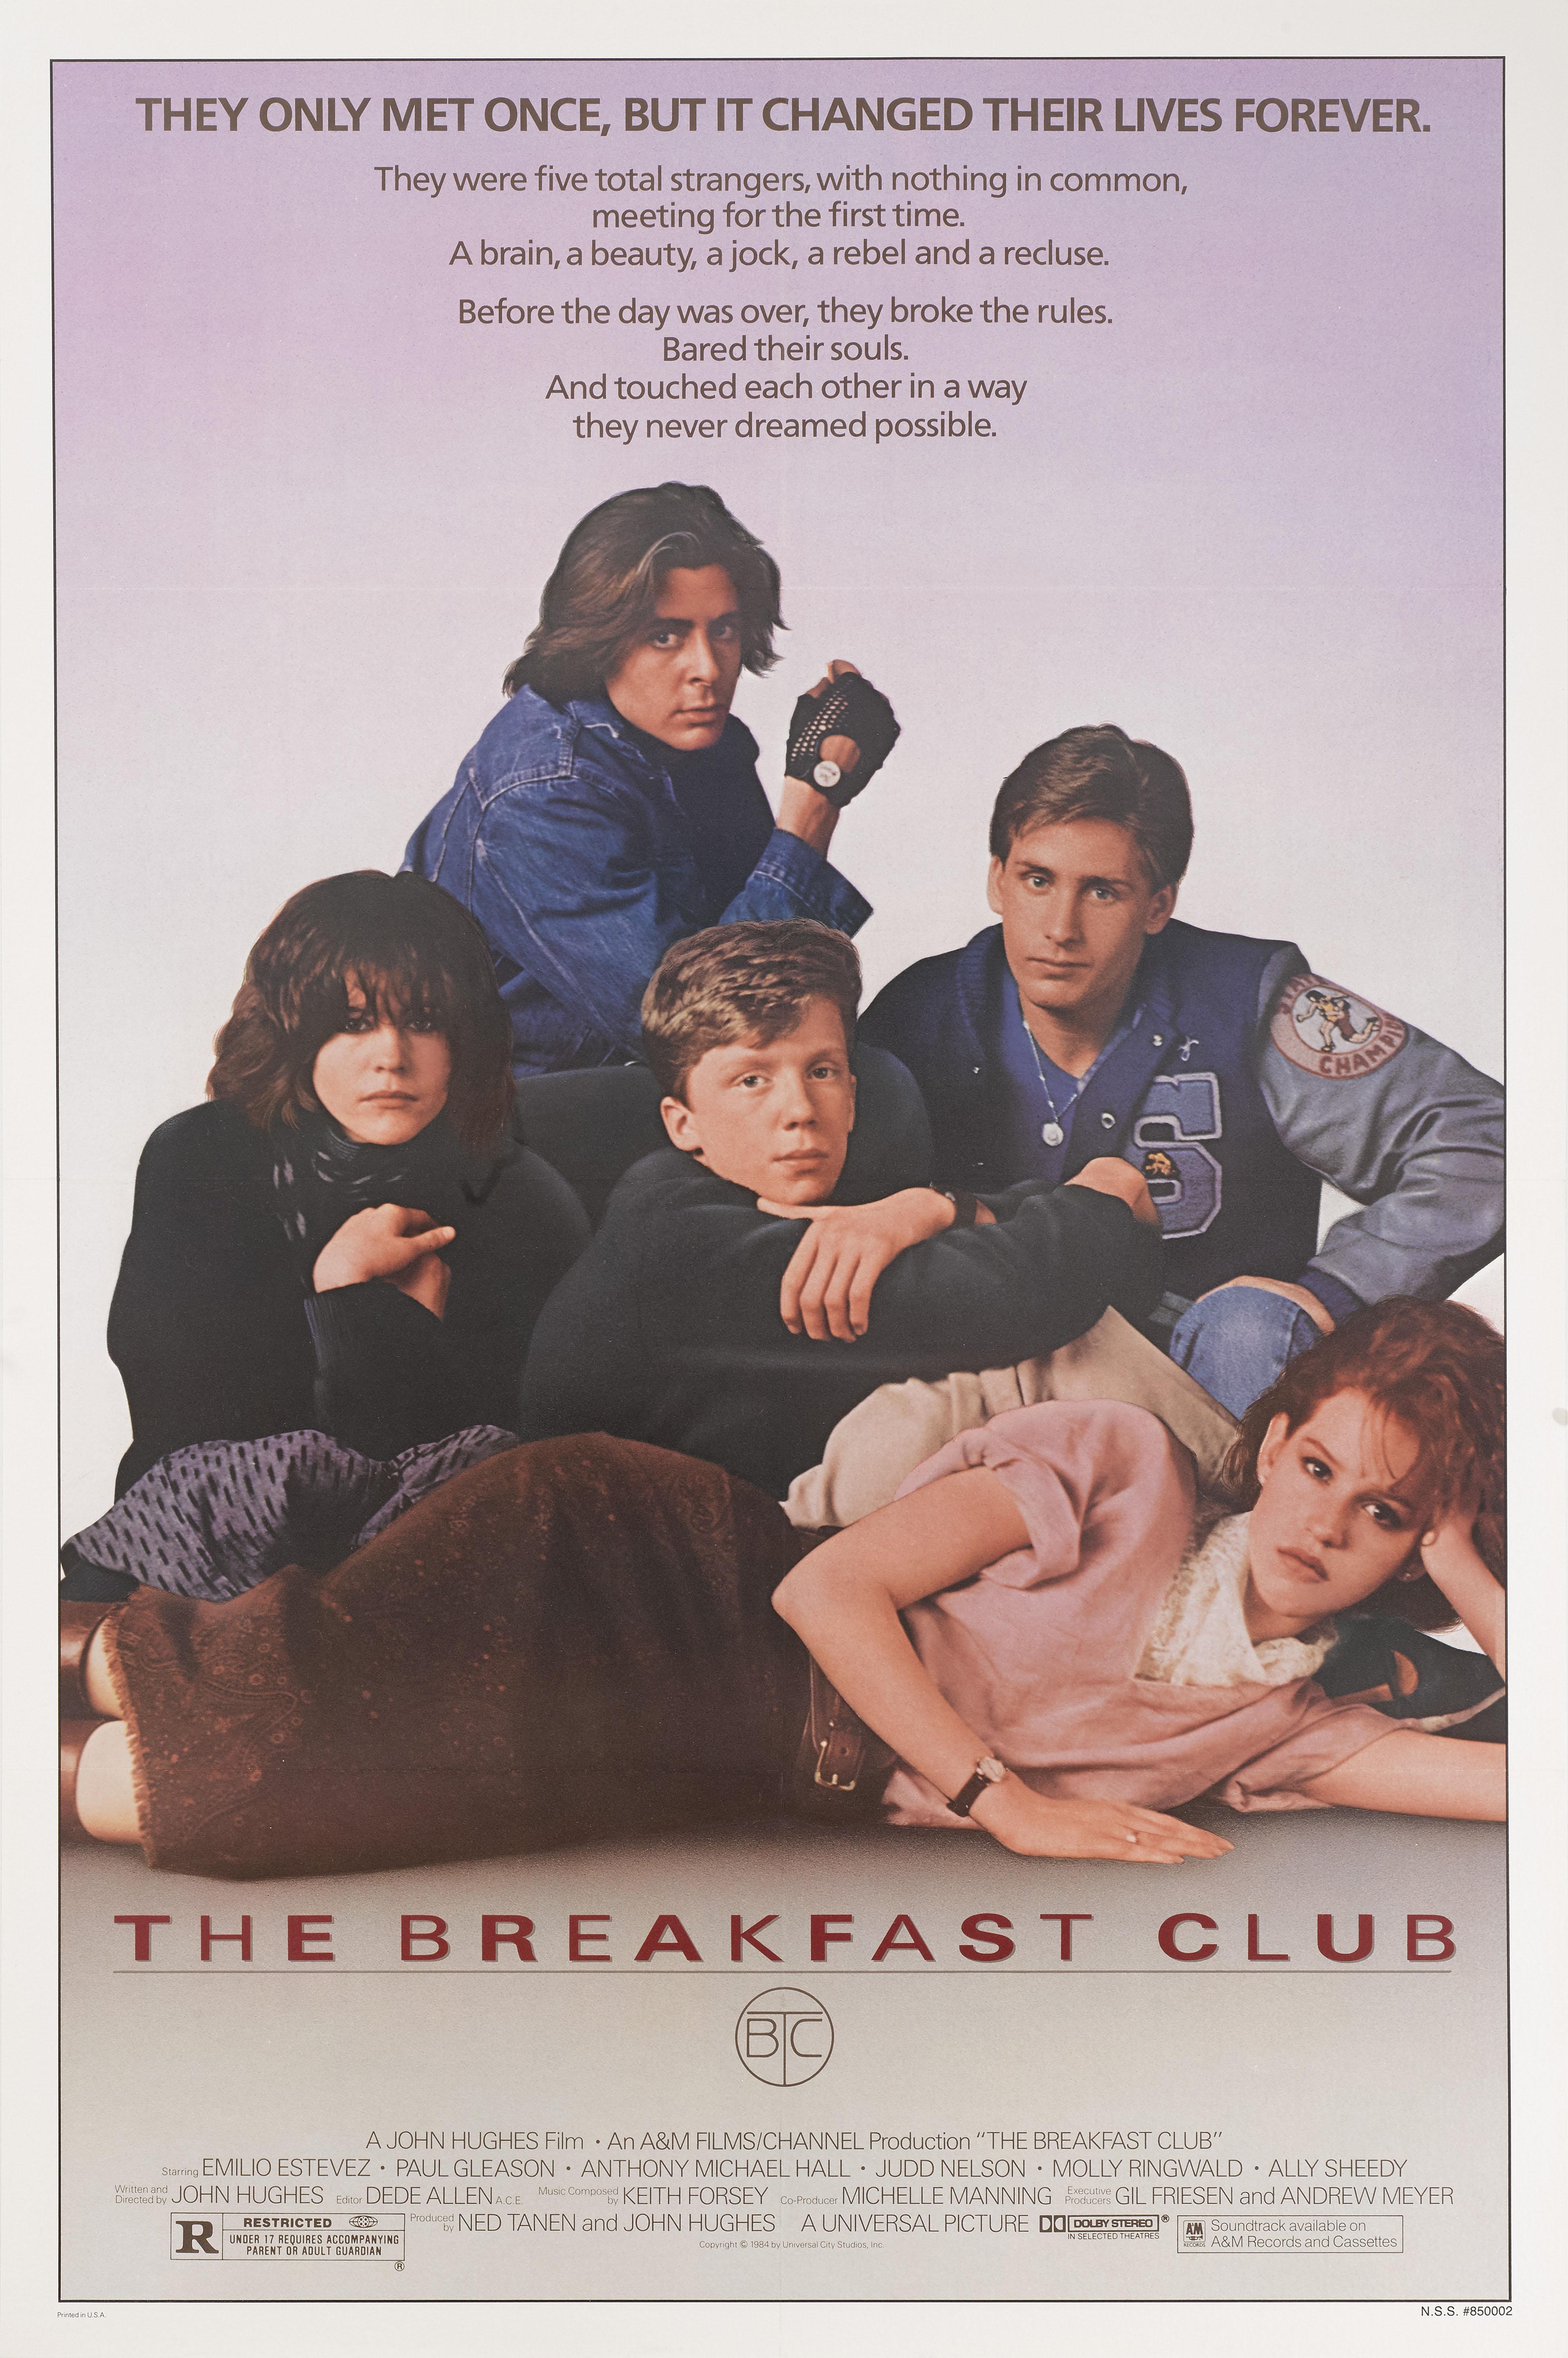 Original US film poster for John Hughes's 1985 comedy staring Emilio Estevez, Judd Nelson, Molly Ringwald,and Ally Sheedy,
The photo used on this poster was taken by the  American portrait photographer Annie Leibovitz.
This piece is conservation